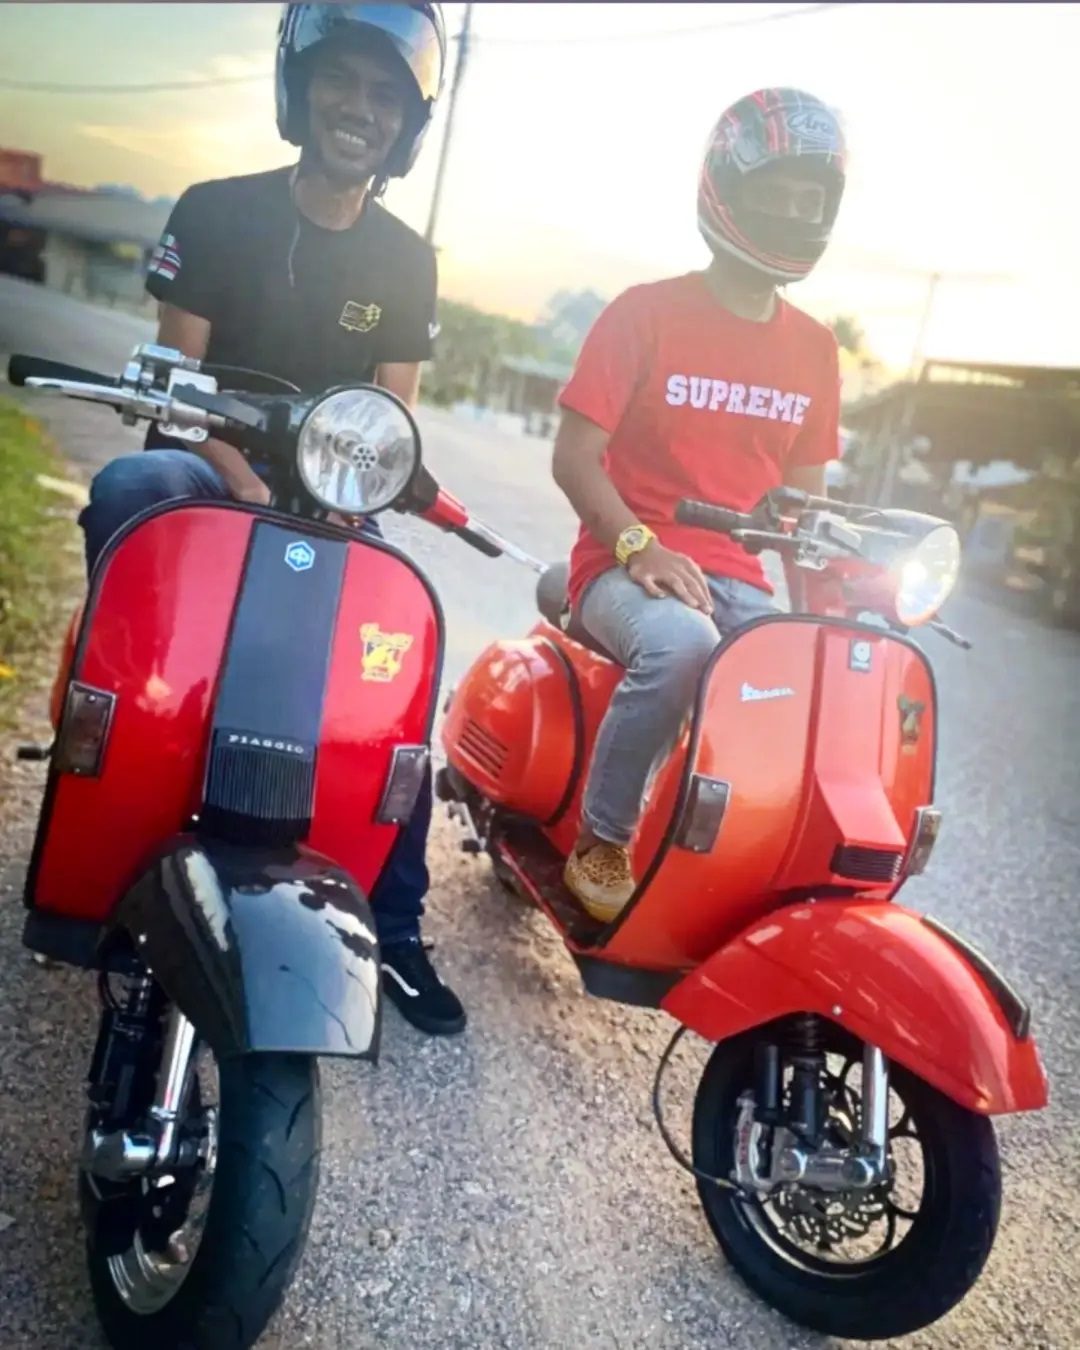 Red Vespa PX custom modified 

Order Vespa genuine wheel from official dealer
Contact Wa 0819-04-595959
Cek photos in highlight @vesparkindo 
Atau shop online www.tokopedia.com/vesparkindo 

Hashtag and mention @vespapxnet for feature repost
Check website www.vespapx.net for more 

@boynasrin